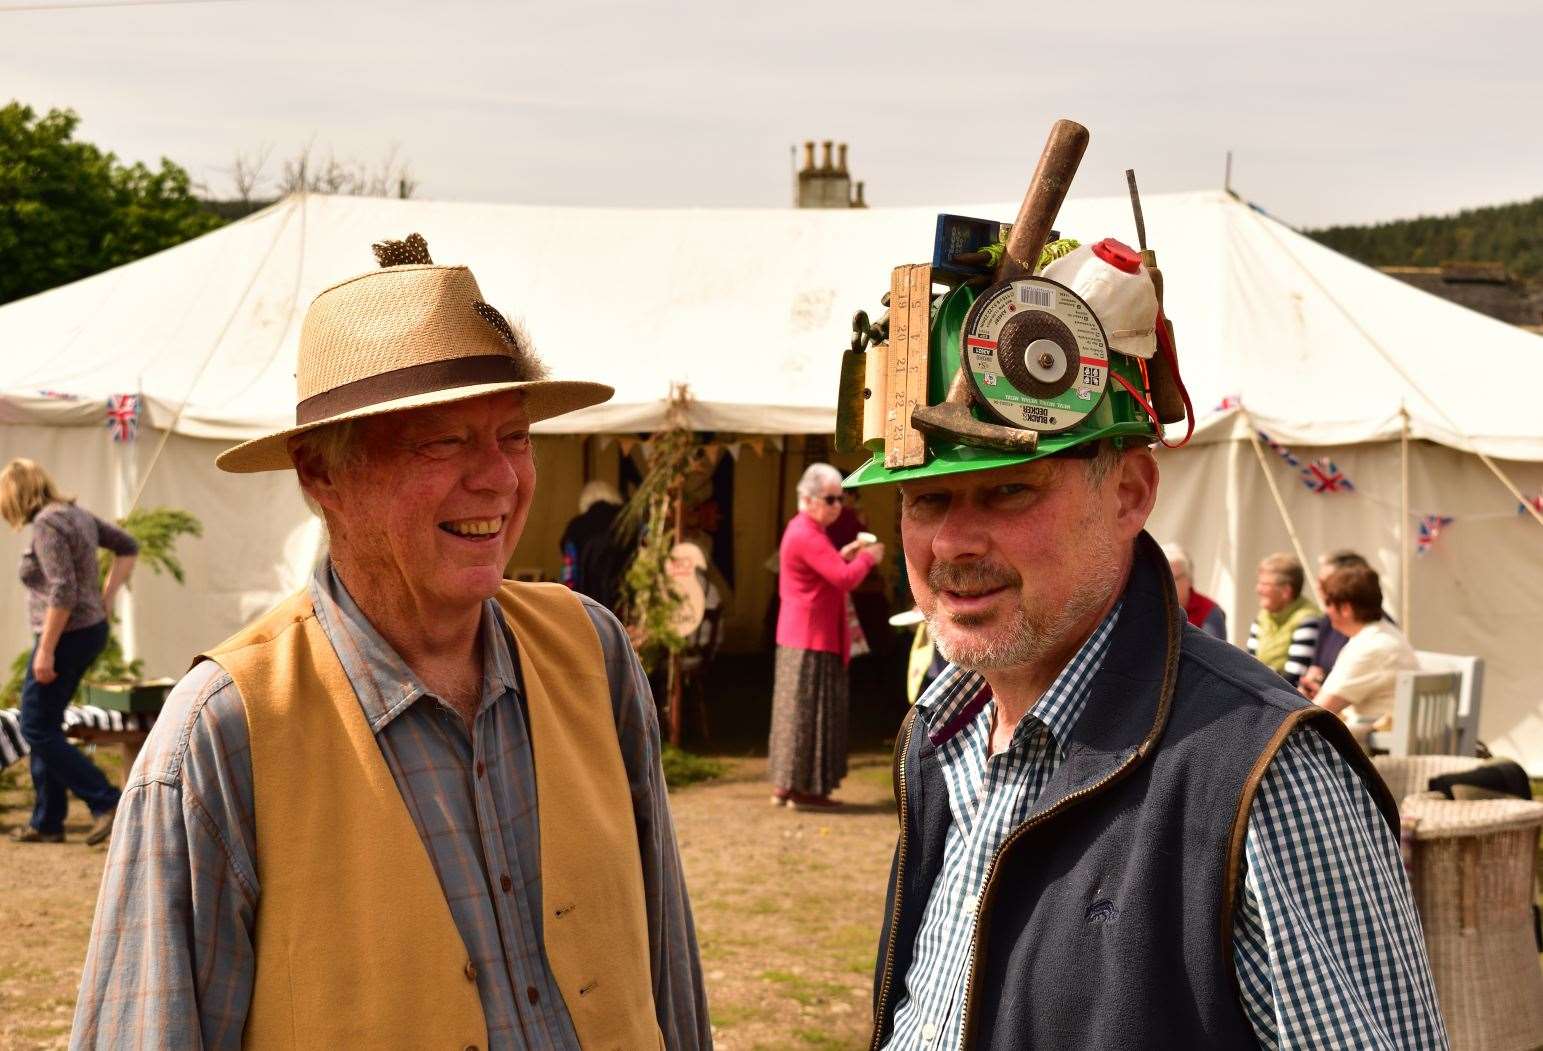 Bailey Bobbit and Graham Charge, whose hat represented the landscaping side of gardening.